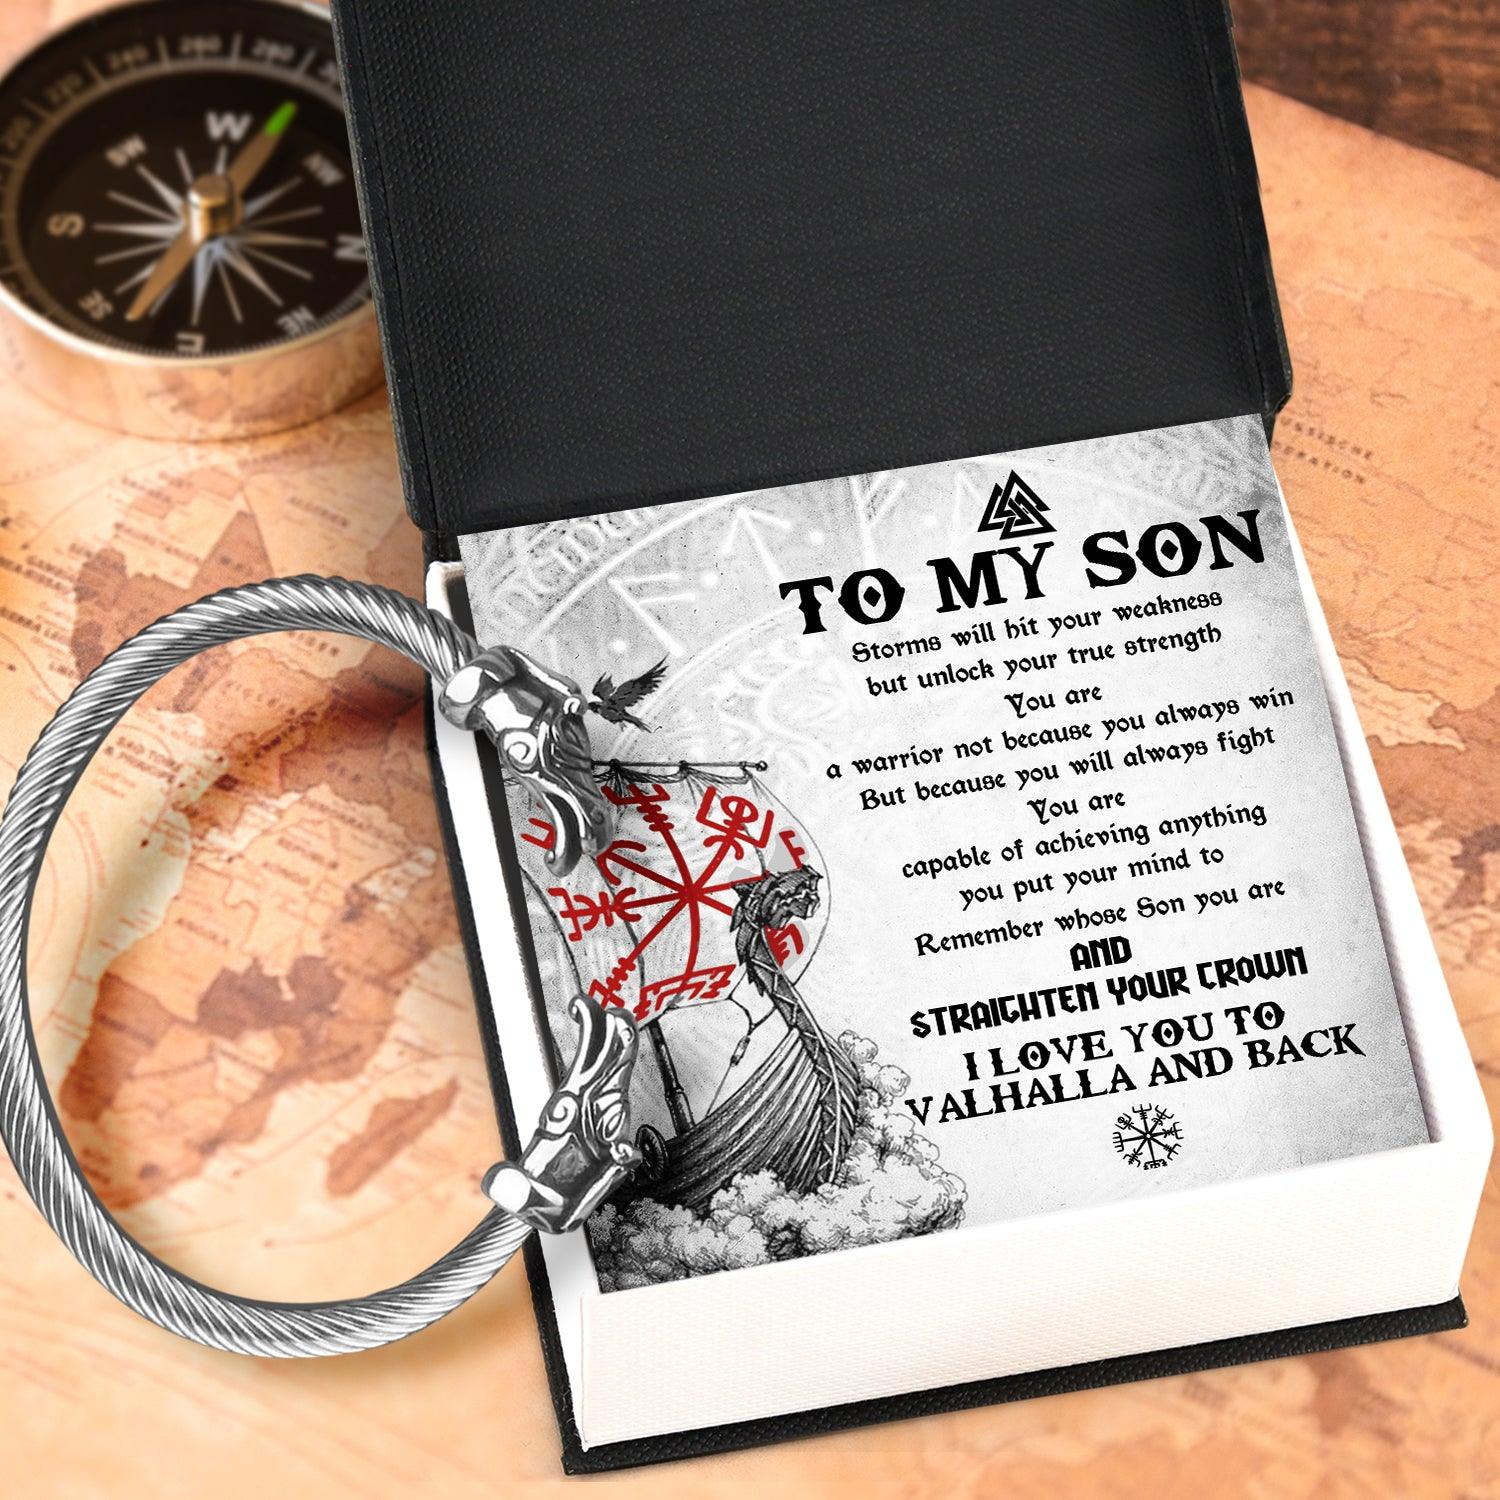 Norse Dragon Bracelet - Viking - To My Son - I Love You To Valhalla And Back - Augbzi16009 - Gifts Holder